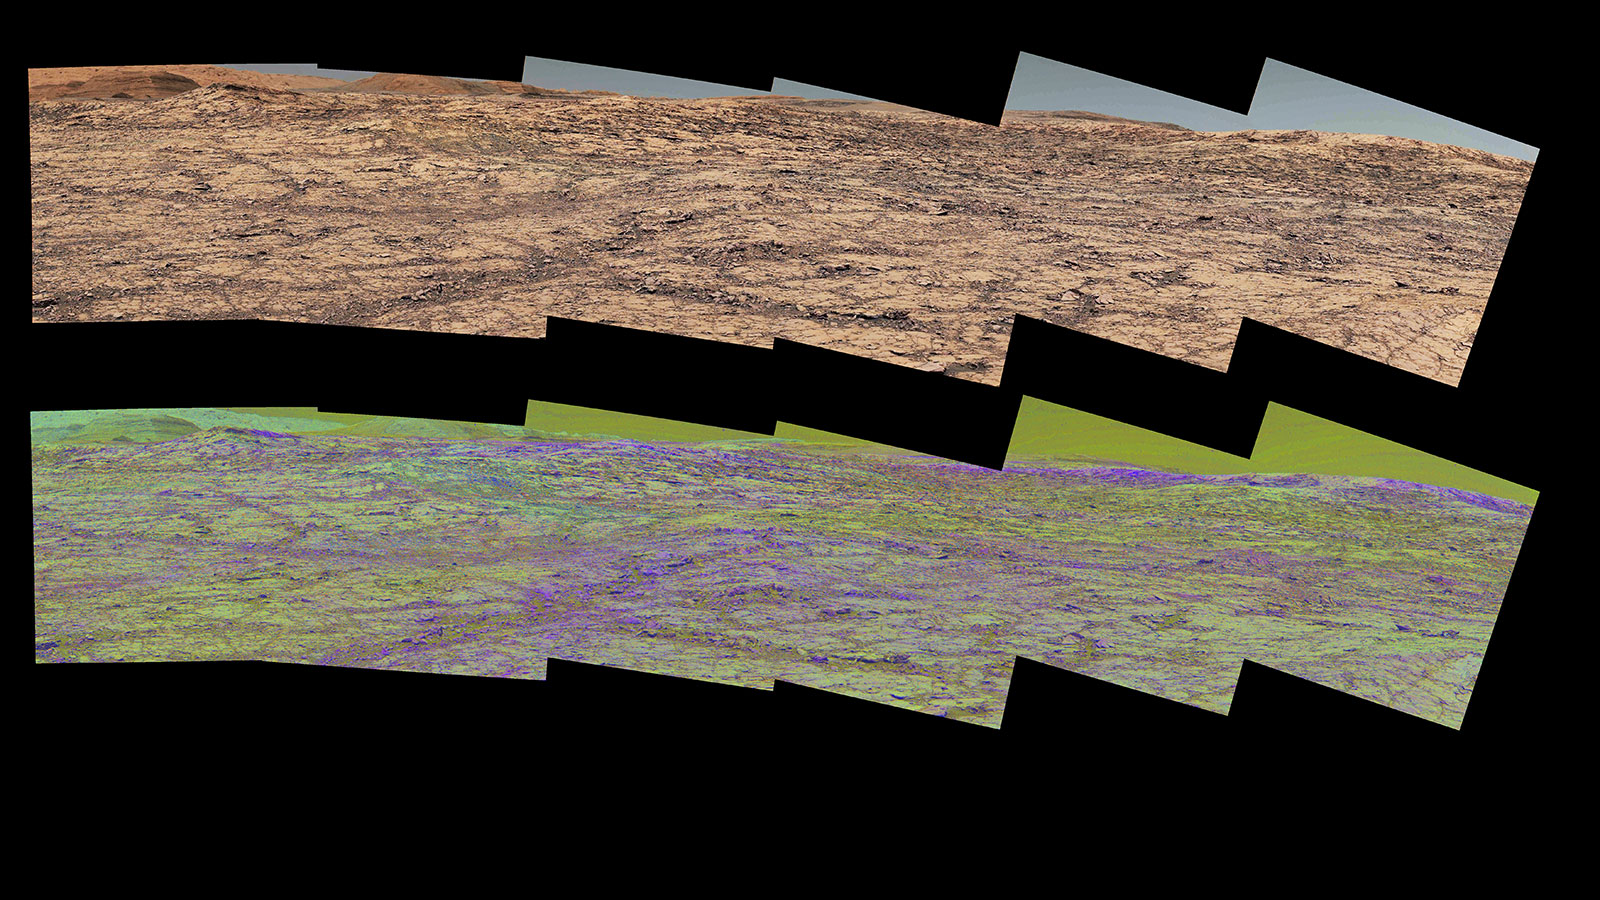 This pair of images from the Mast Camera (Mastcam) on NASA's Curiosity rover illustrates how special filters are used to scout terrain ahead for variations in the local bedrock.